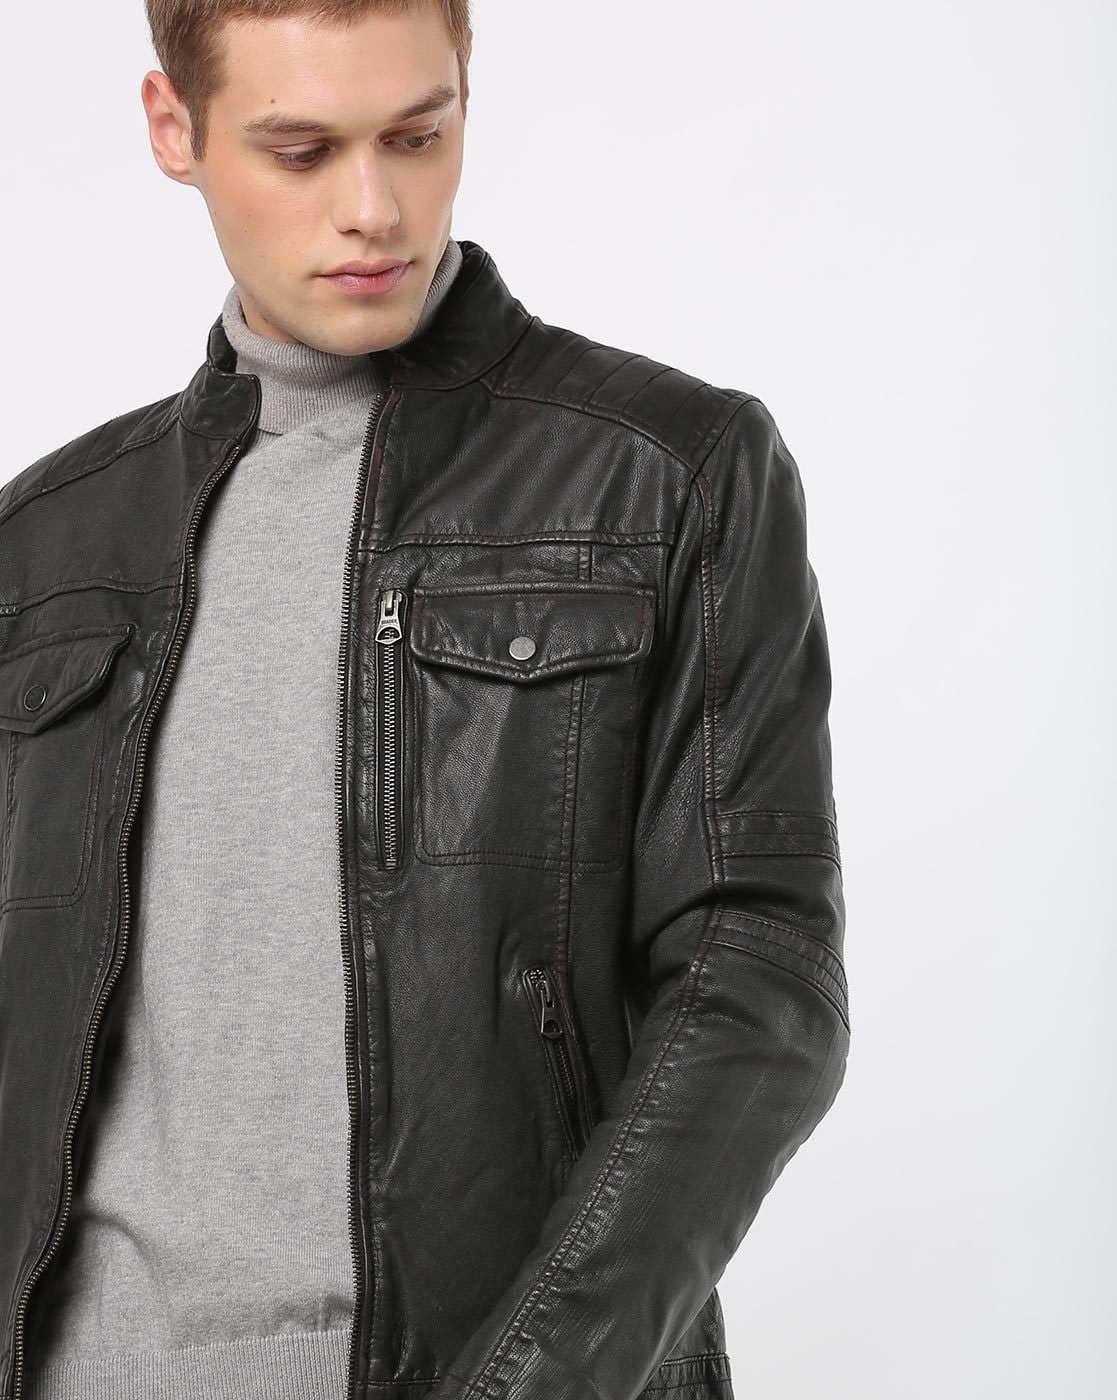 The Jacket Maker: Authentic Custom Leather Jackets For Men & Women